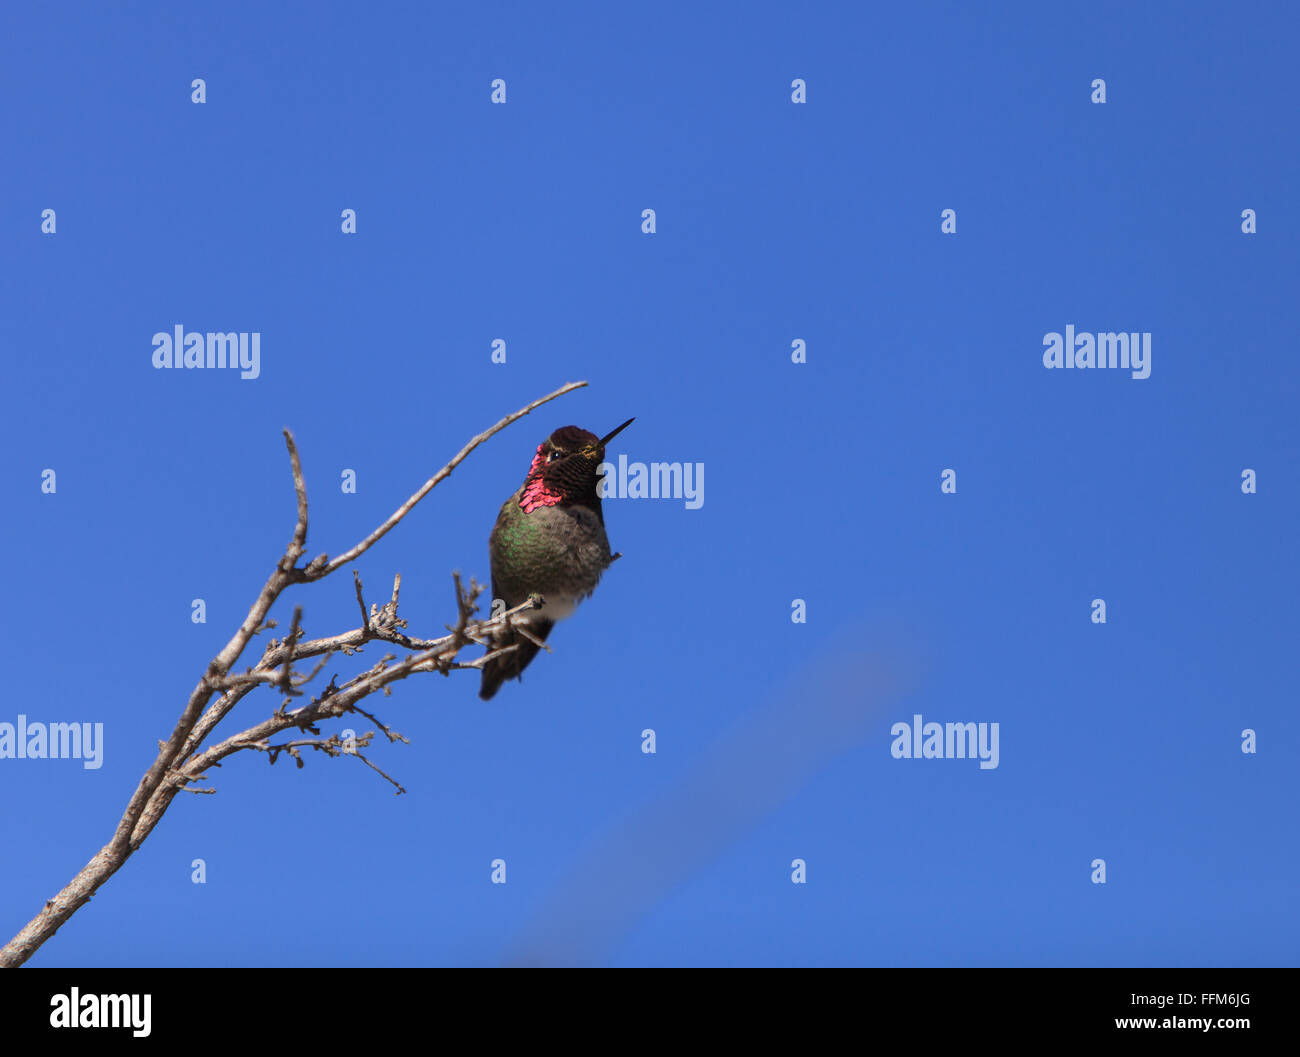 Male Anna’s Hummingbird, Calypte anna, is a green and red bird sitting in a tree at the San Joaquin wildlife sanctuary, Southern Stock Photo